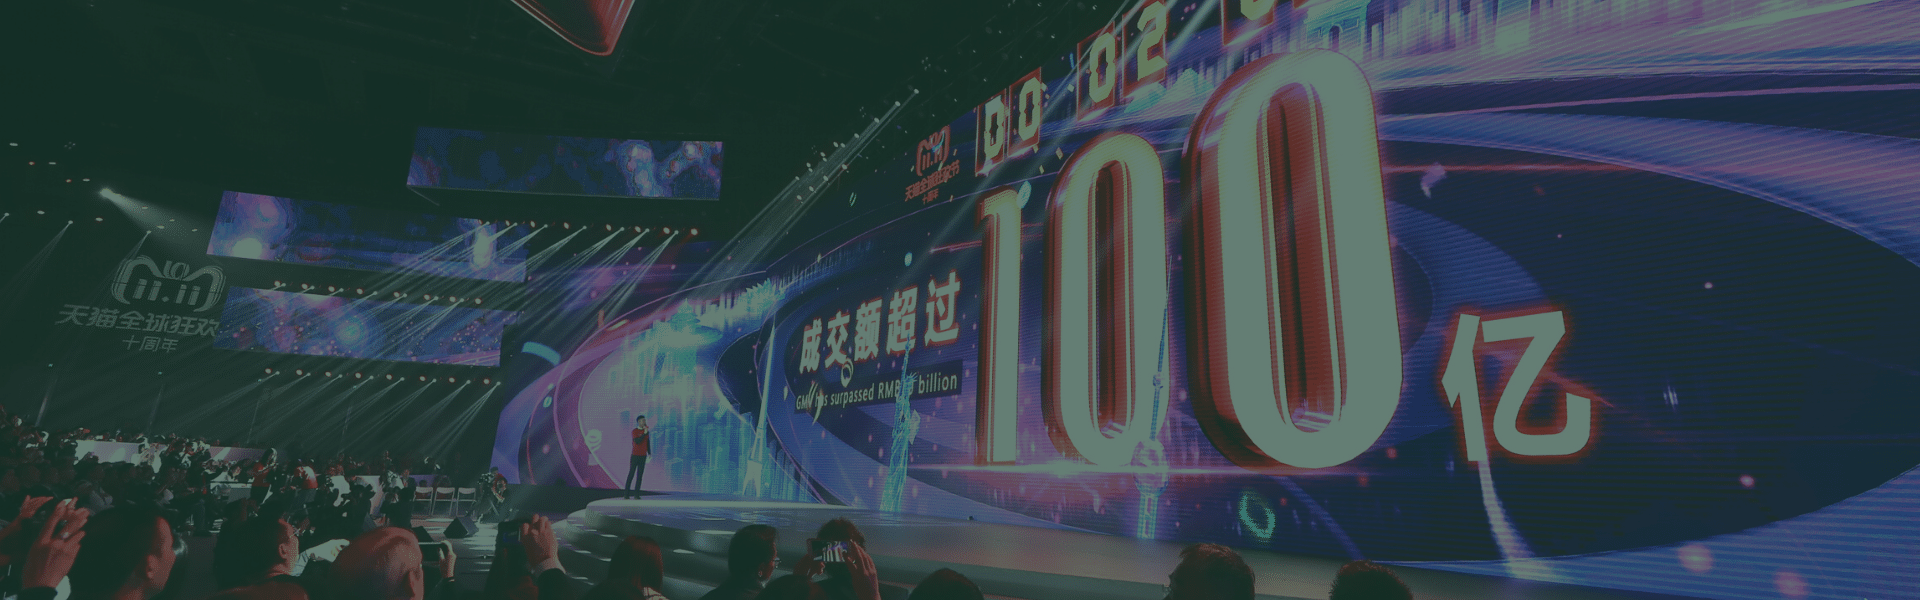 Blog: China E-commerce 101 - An Introduction